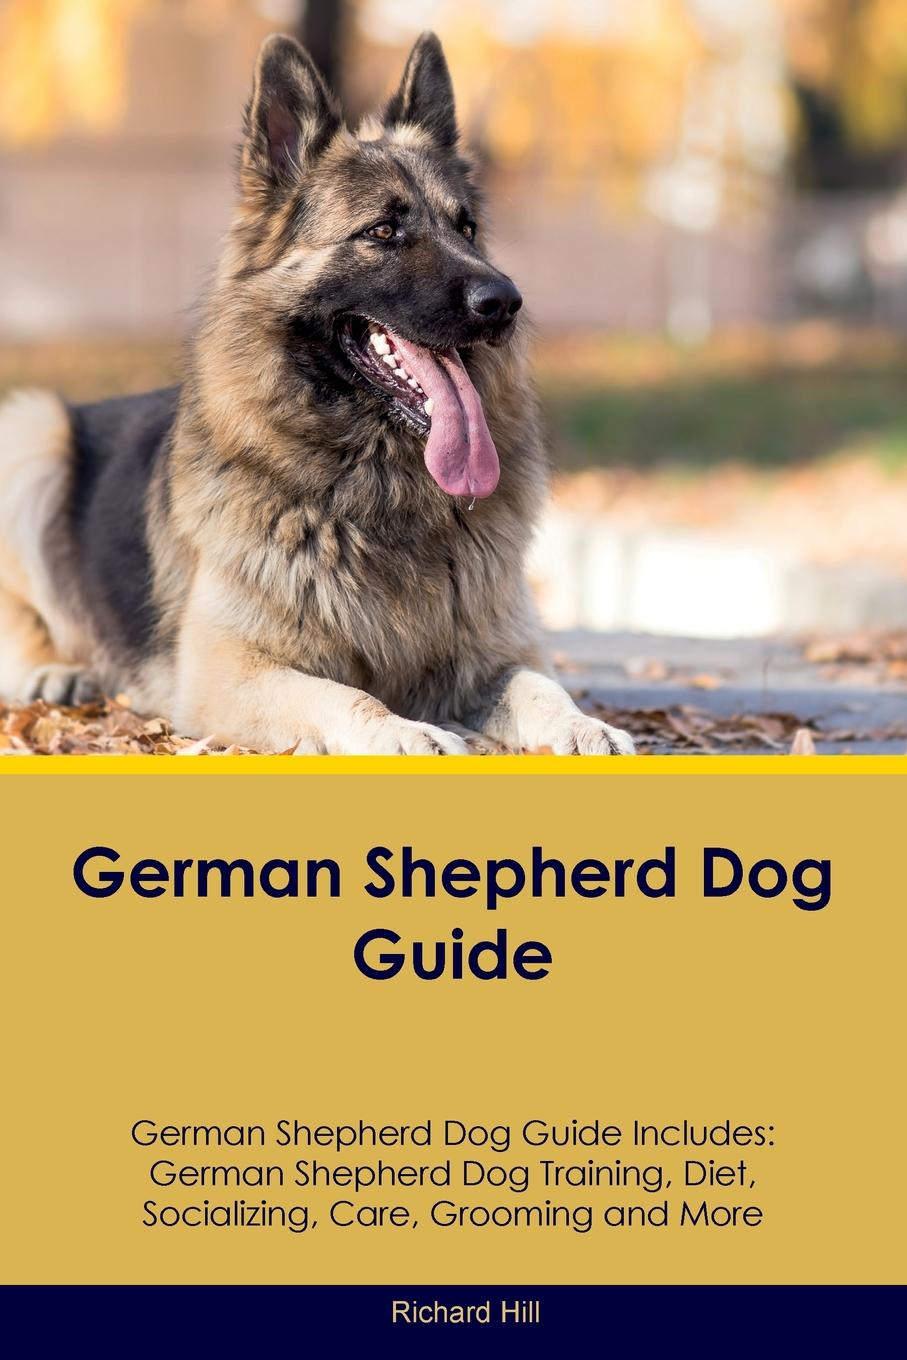 German Shepherd Dog Guide German Shepherd Dog Guide Includes. German Shepherd Dog Training, Diet, Socializing, Care, Grooming, Breeding and More